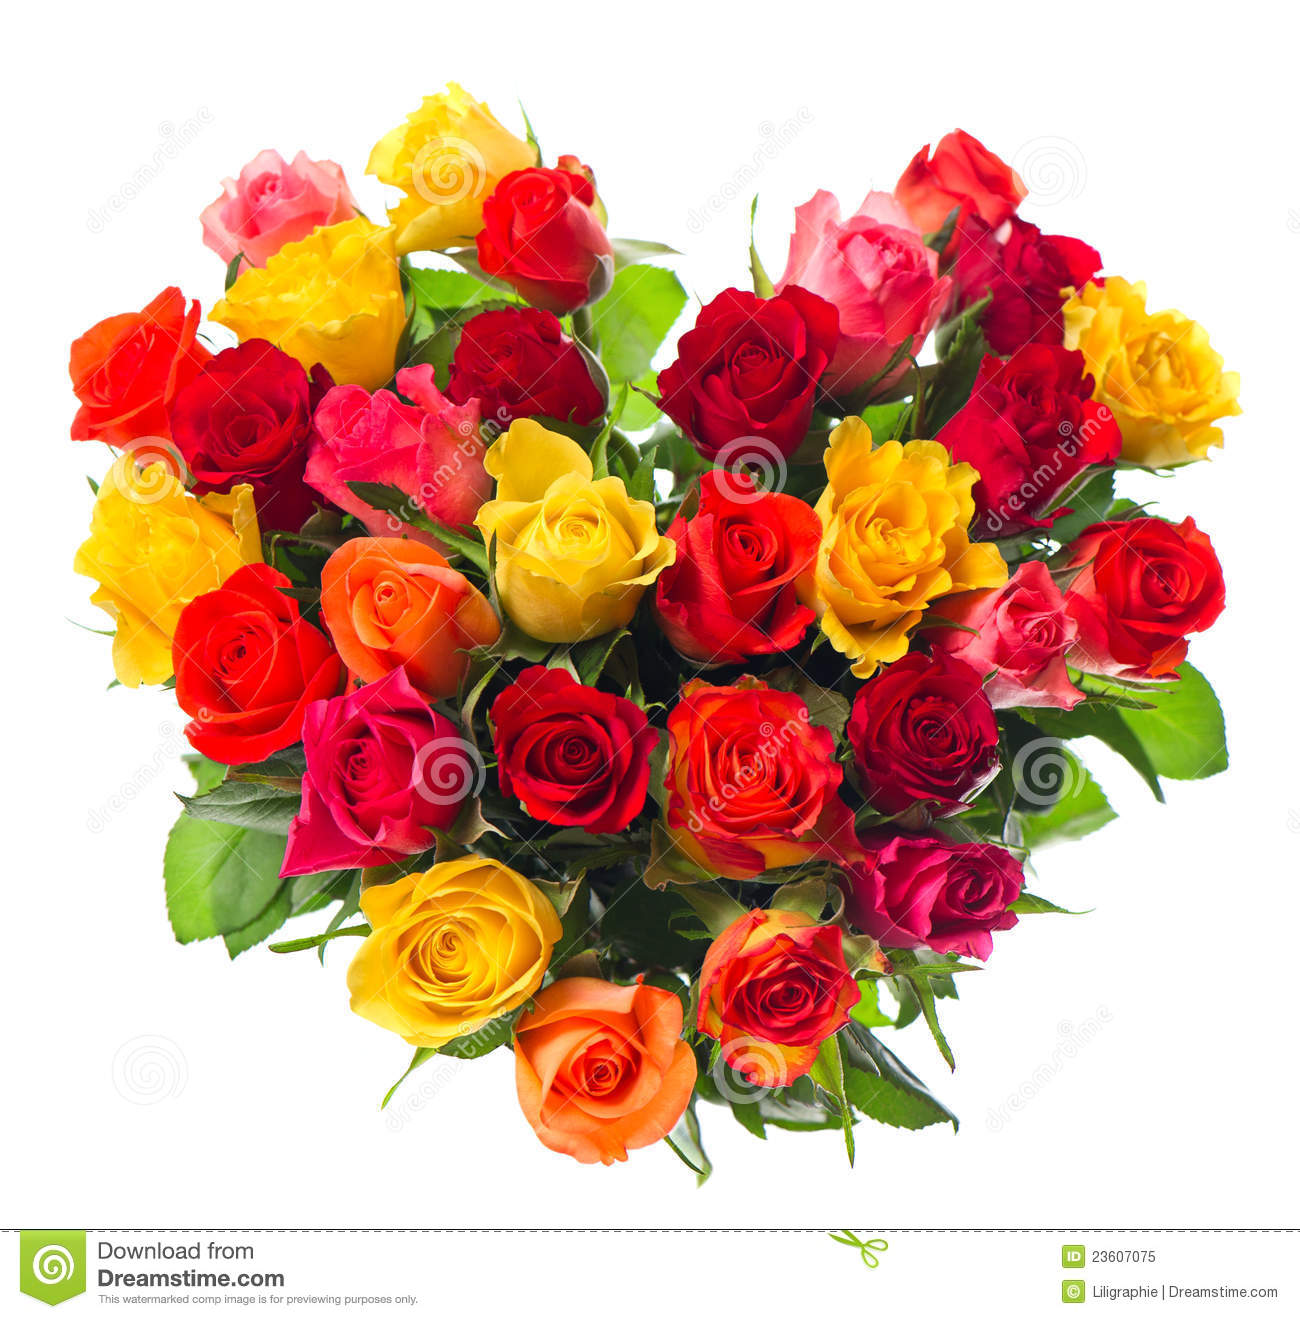 Free Stock Photo  Bouquet Of Colorful Assorted Roses In Heart Shape